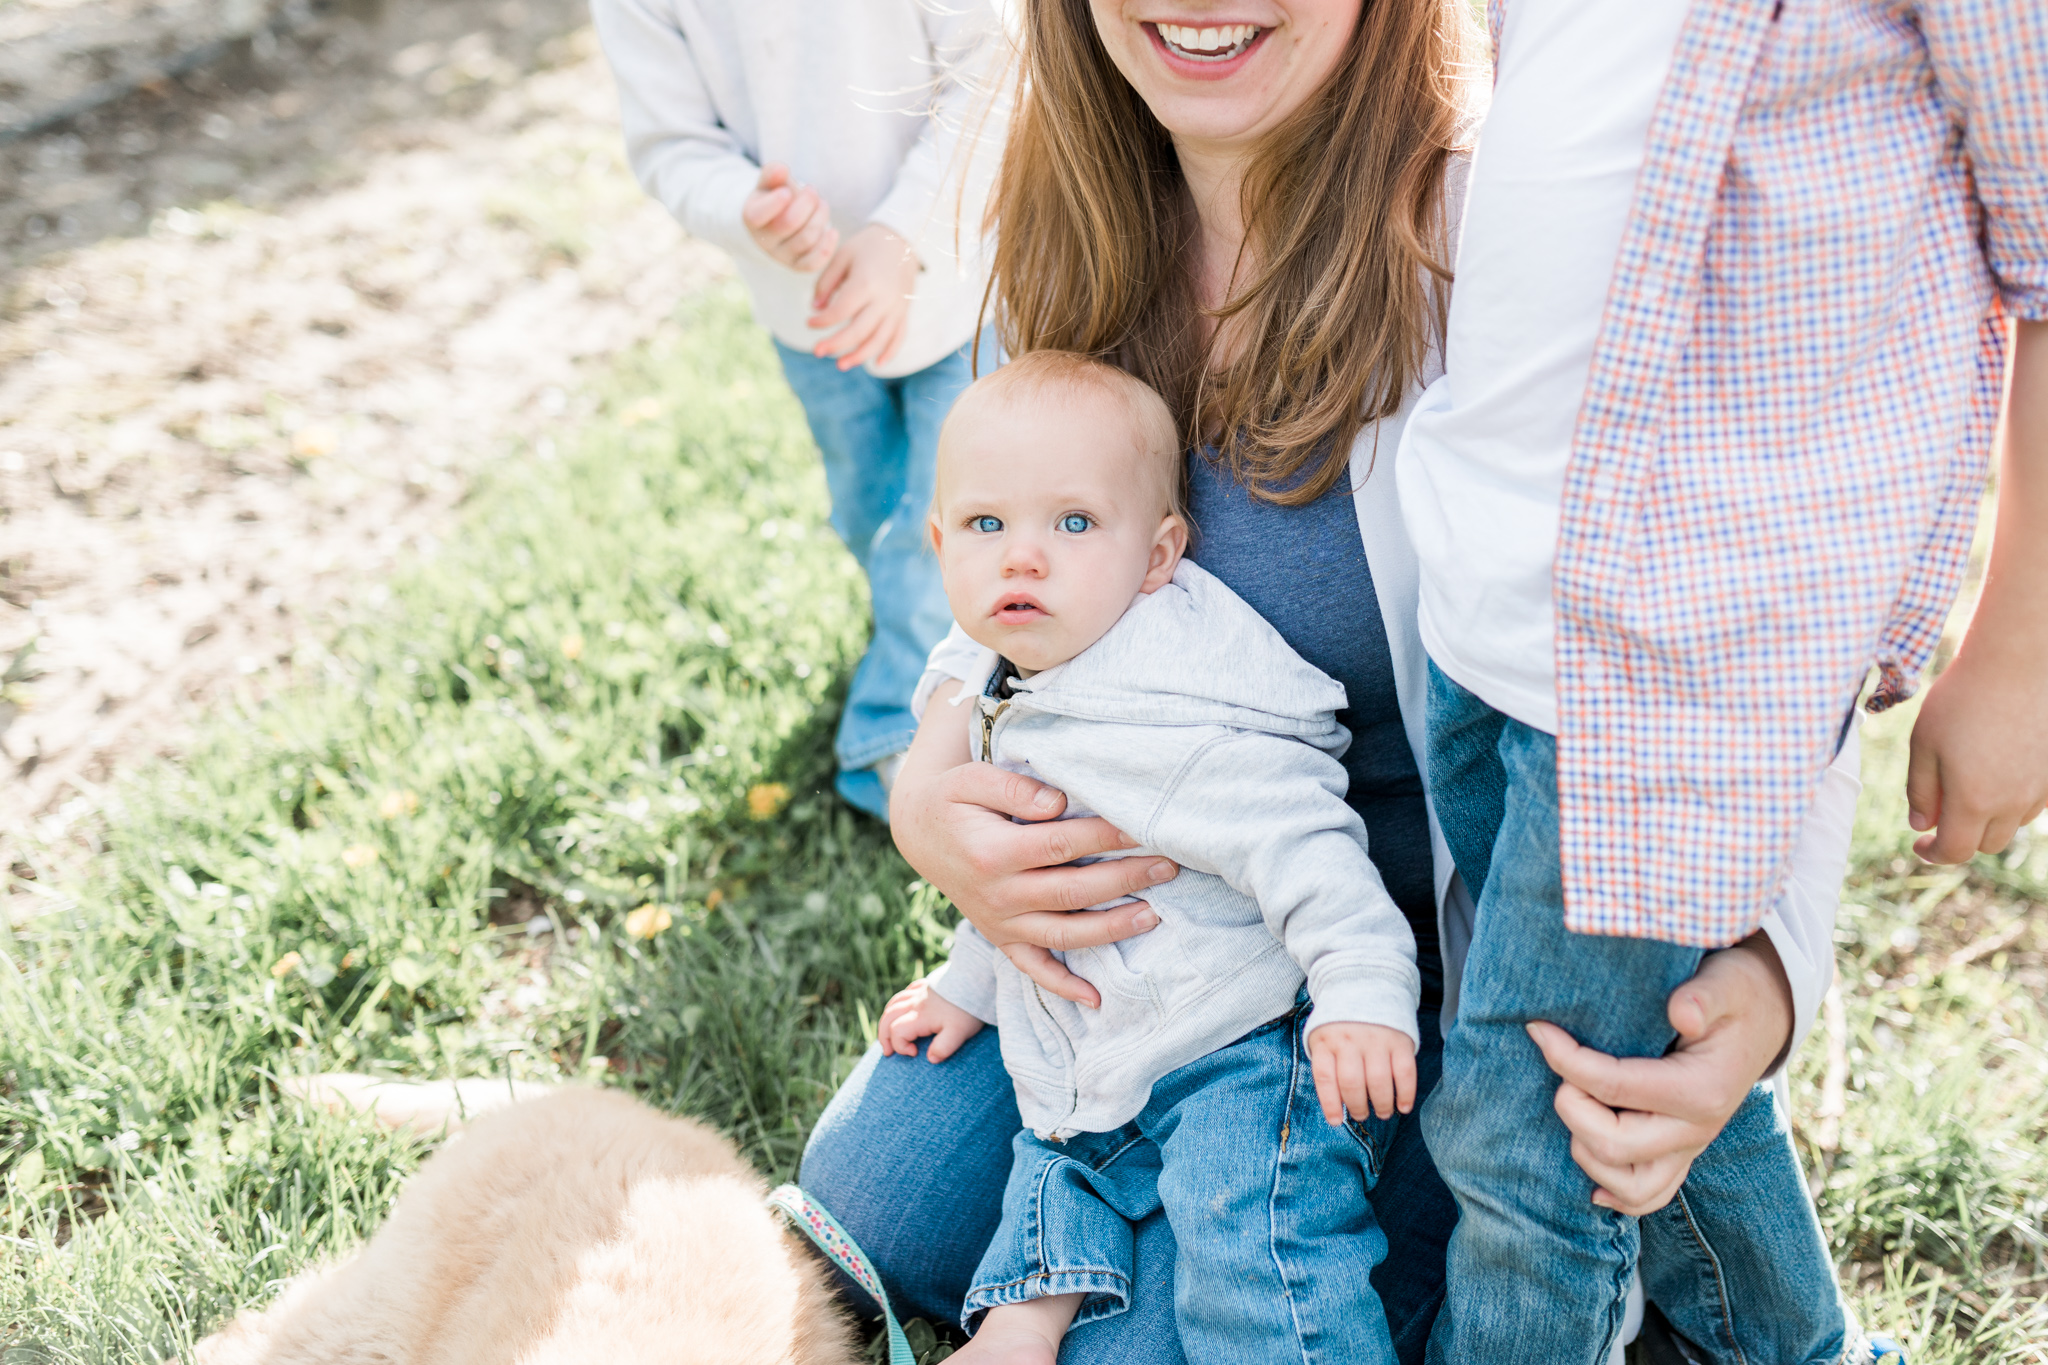 Family Mini Session | Brothers | What to Wear | Family Photos | Orchard with Spring Blooms | Laurenda Marie Photography